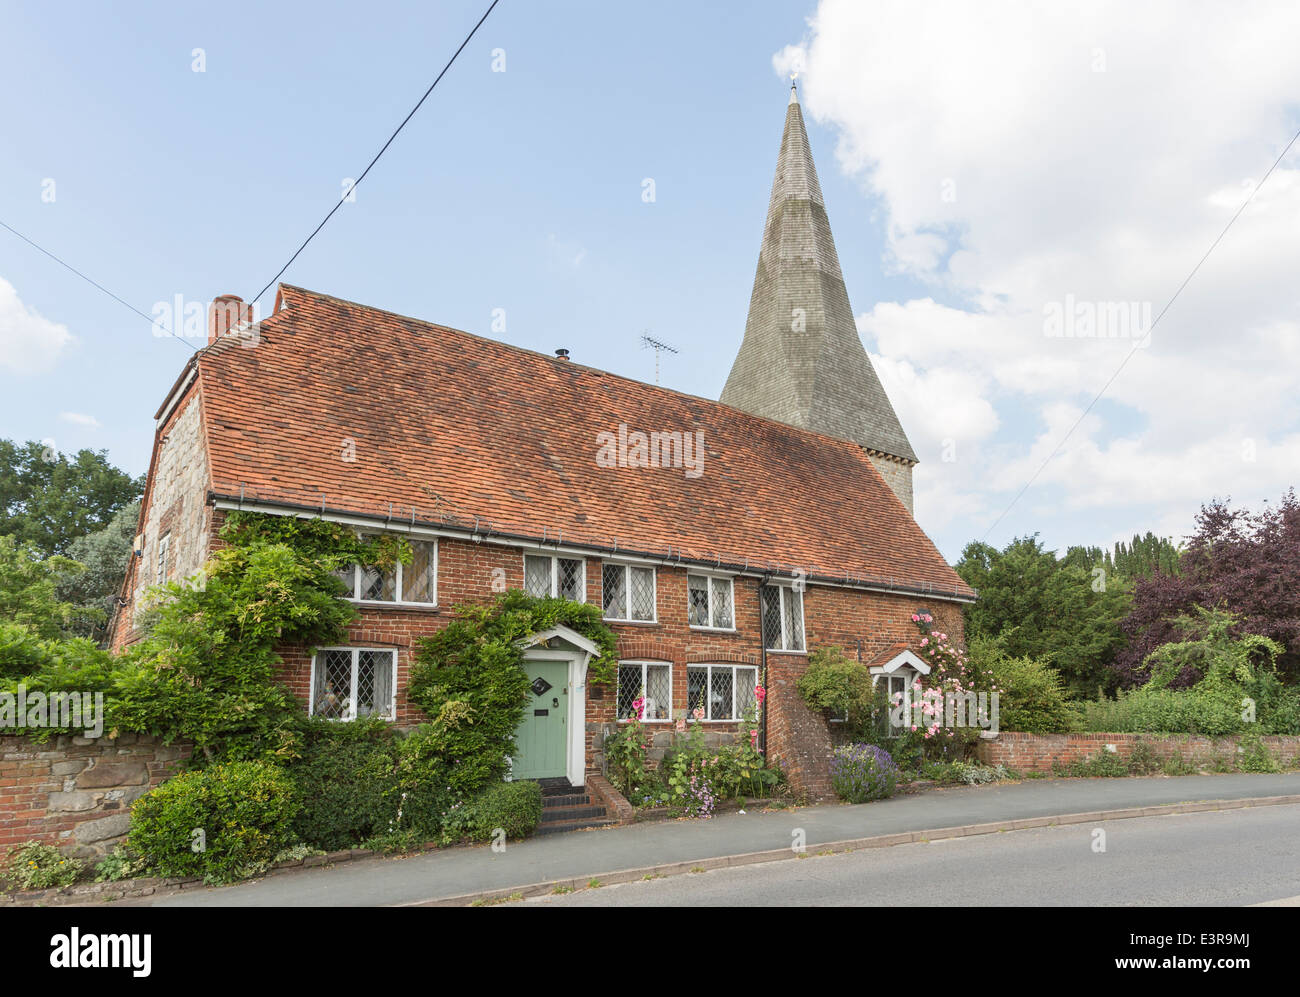 Fourteenth century cottage and St Peter's church spire in Ash, Guildford, Surrey with hollyhocks, roses around the windows Stock Photo